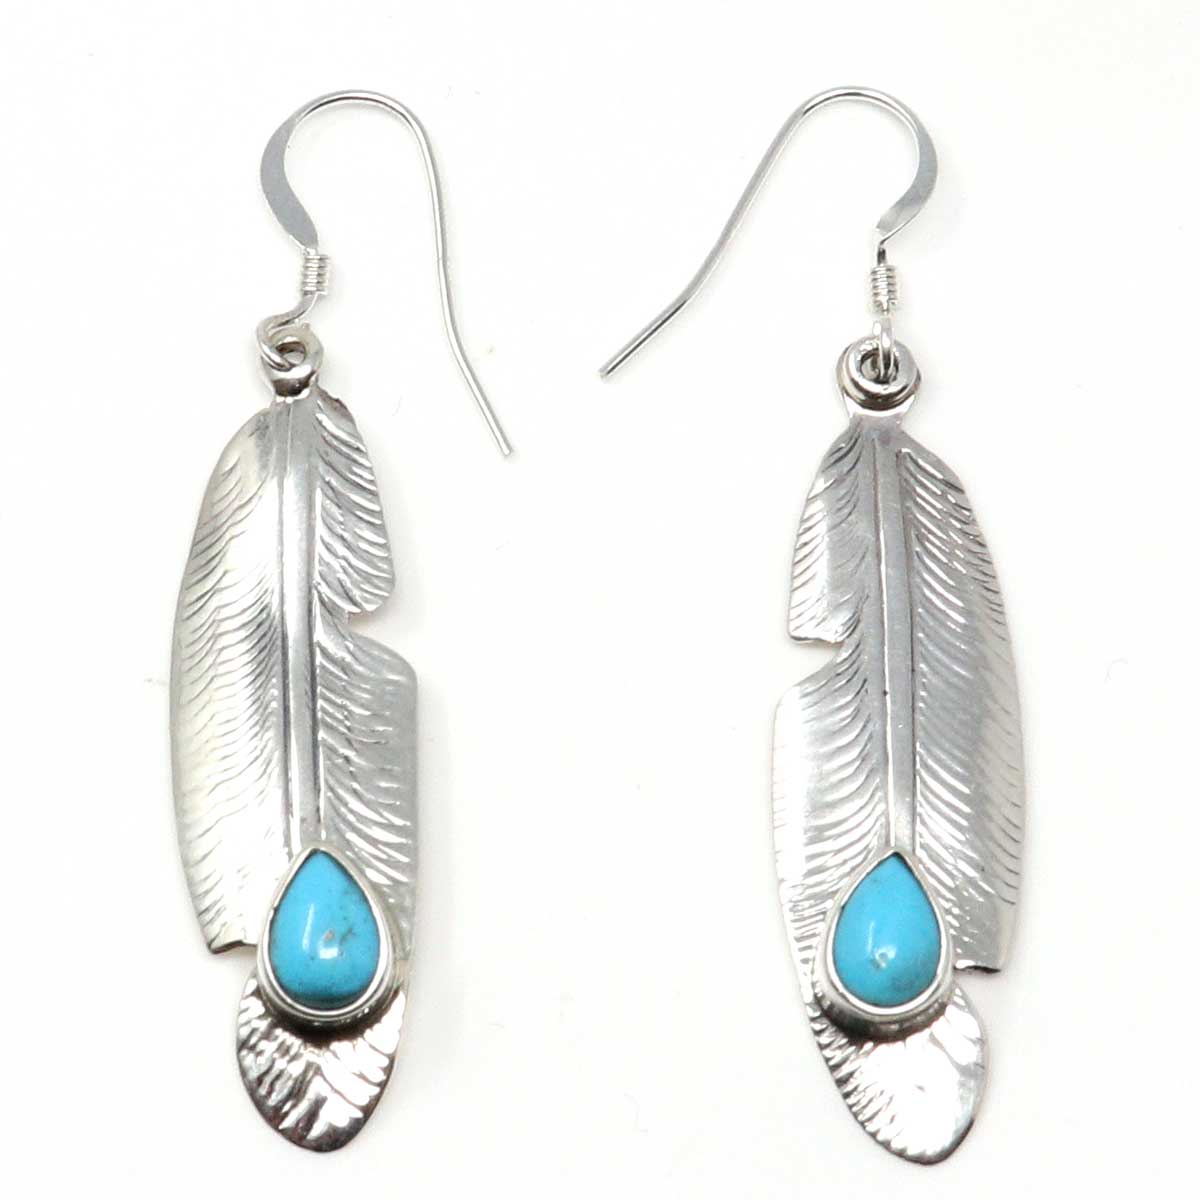 Eagle feather earrings – Wolfwalker Collections